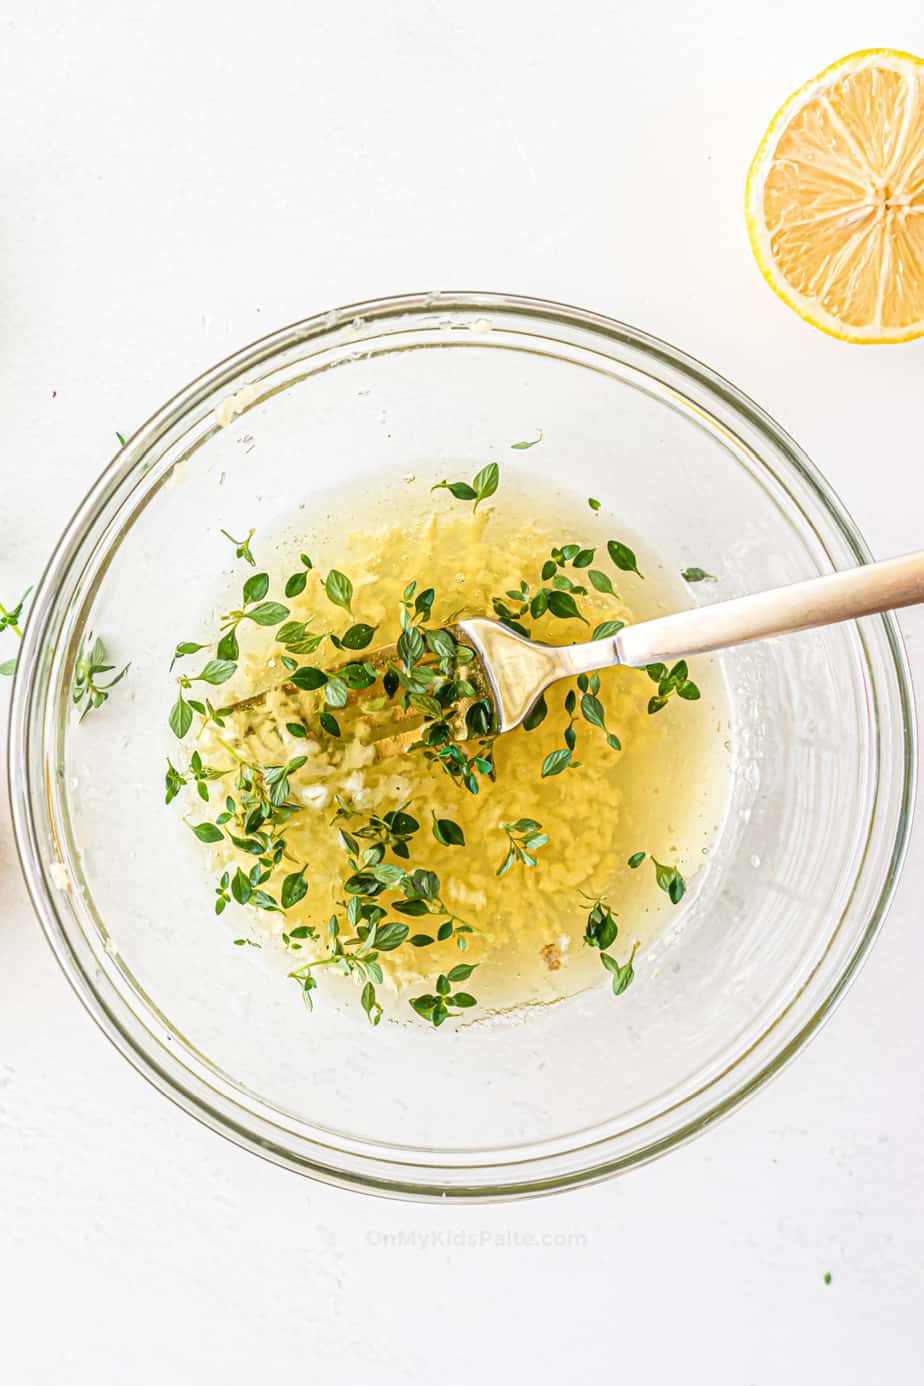 Mixing lemon juice, garlic, olive oil, and spices for marinade in a large glass bowl.